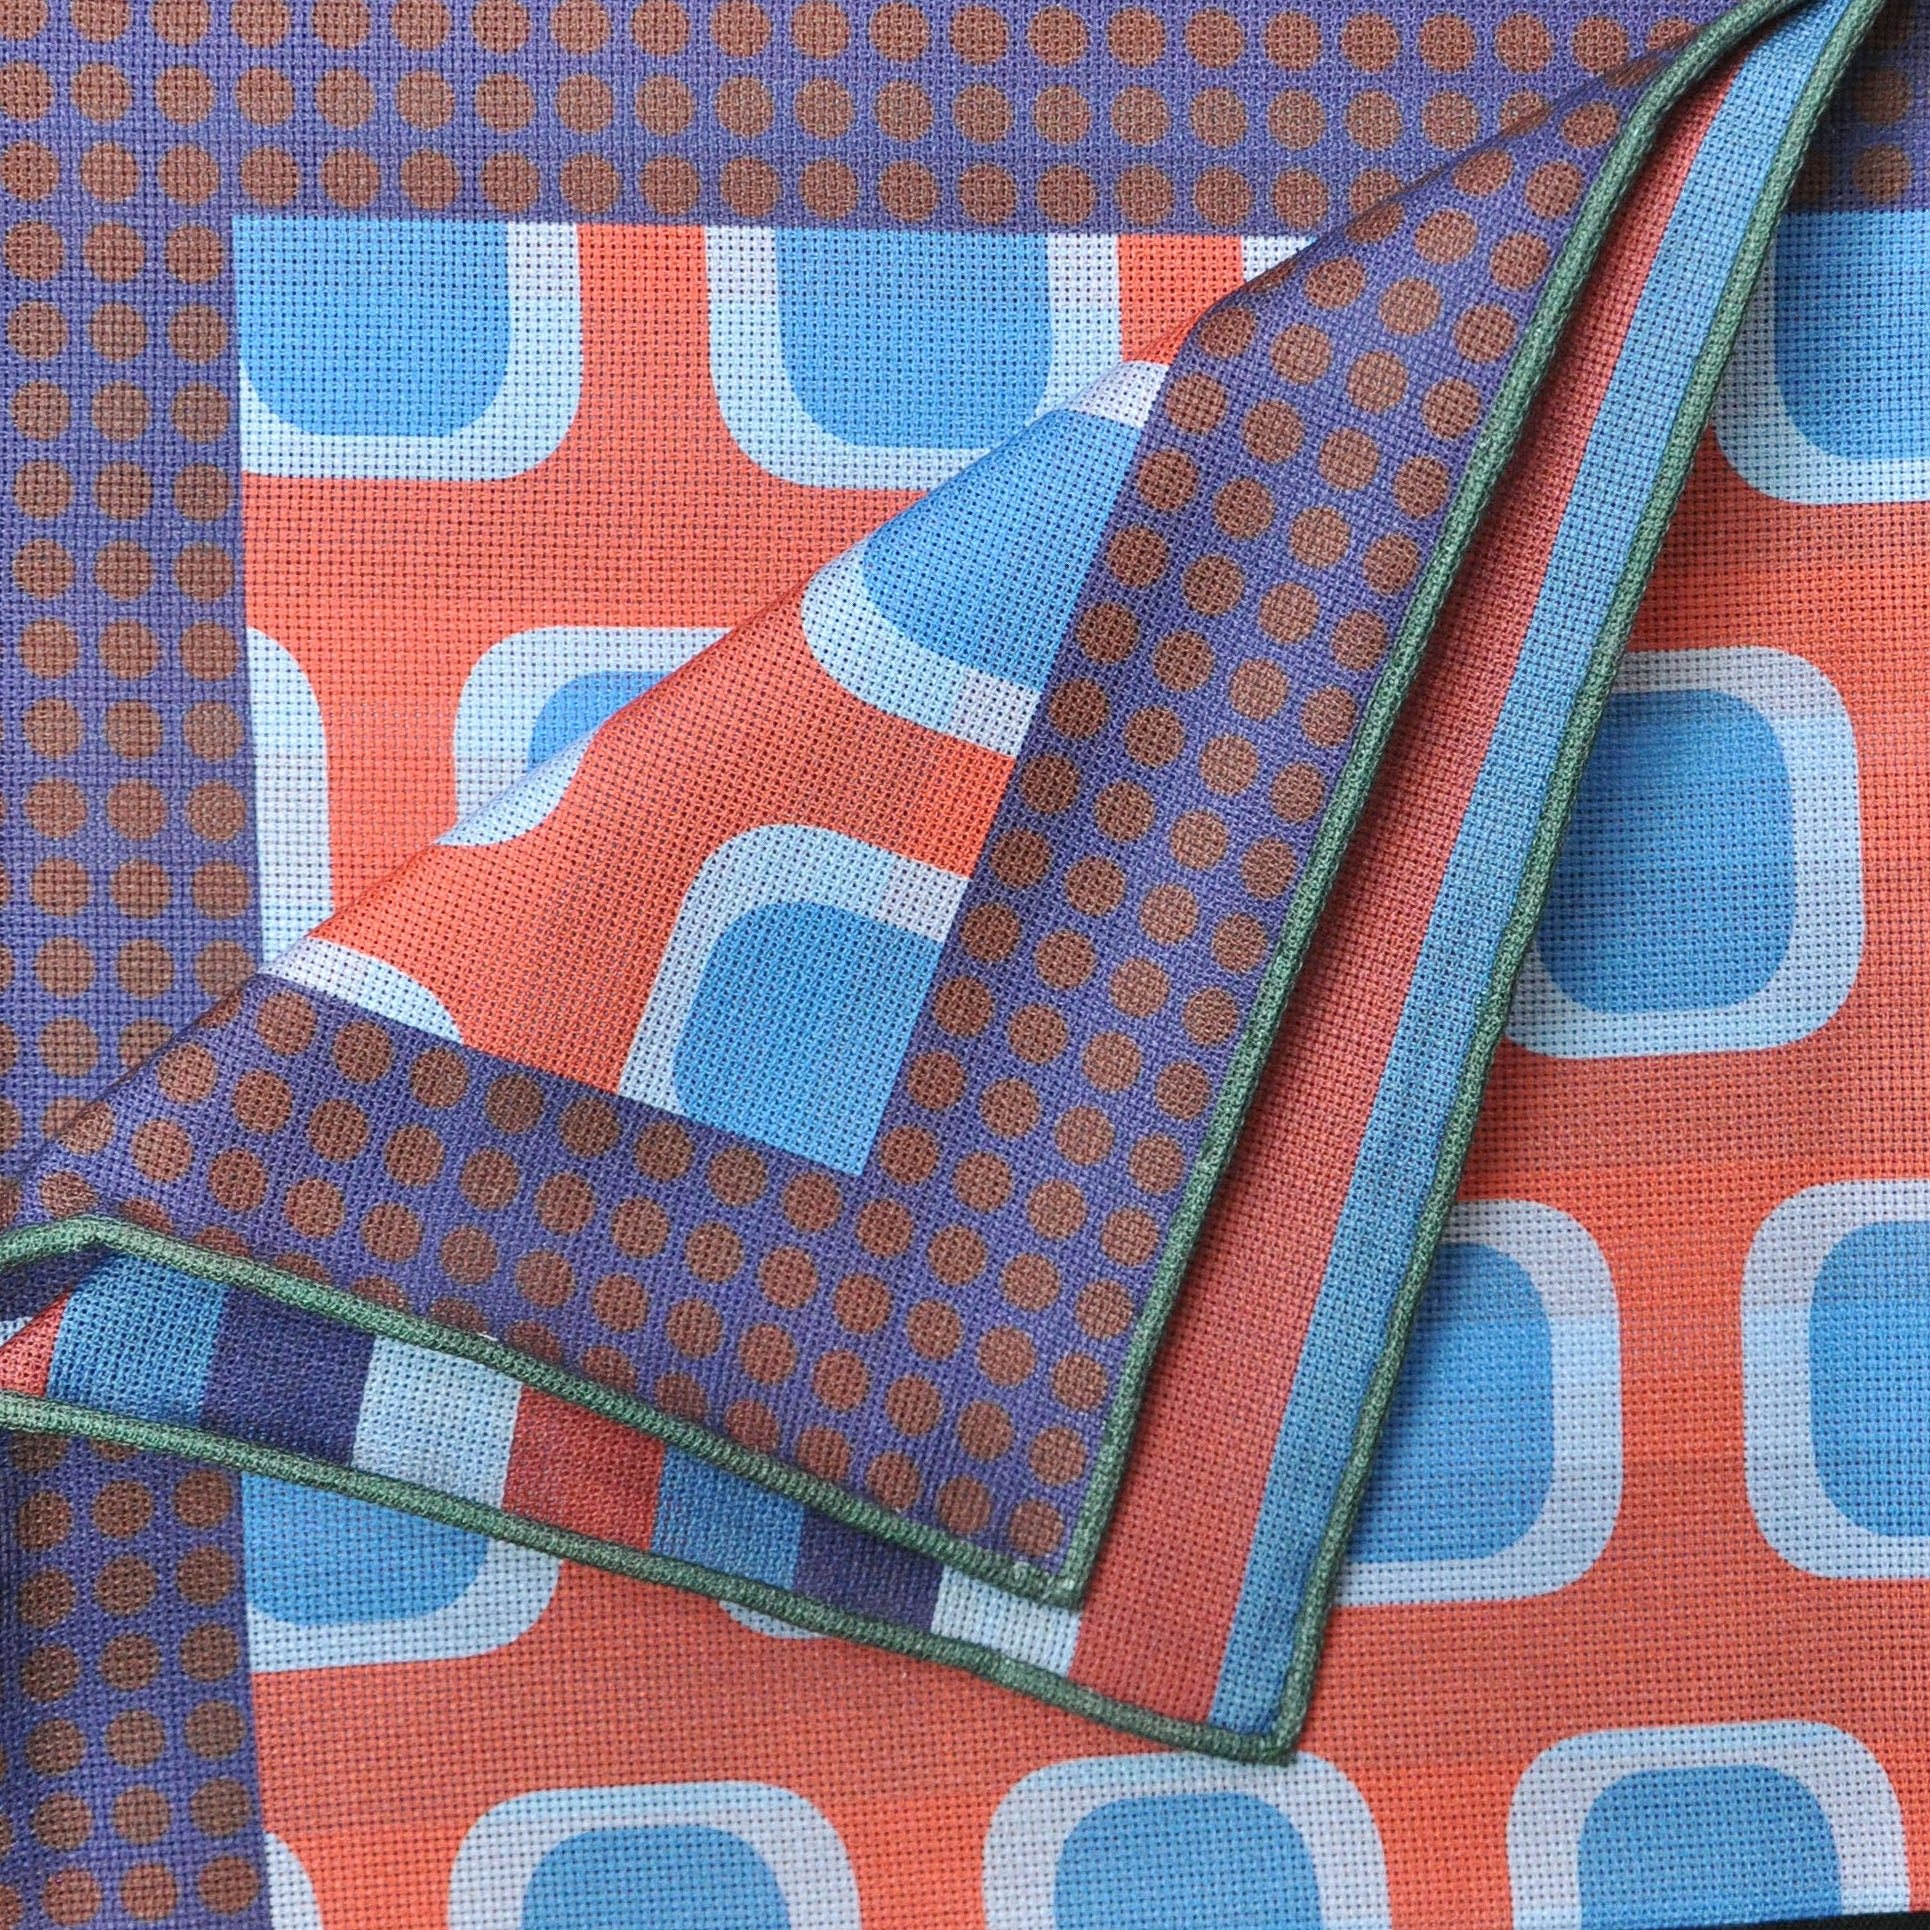 Dots, Geo's & Stripes Reversible Panama Silk Pocket Square in Navy, Blue & Peach Red